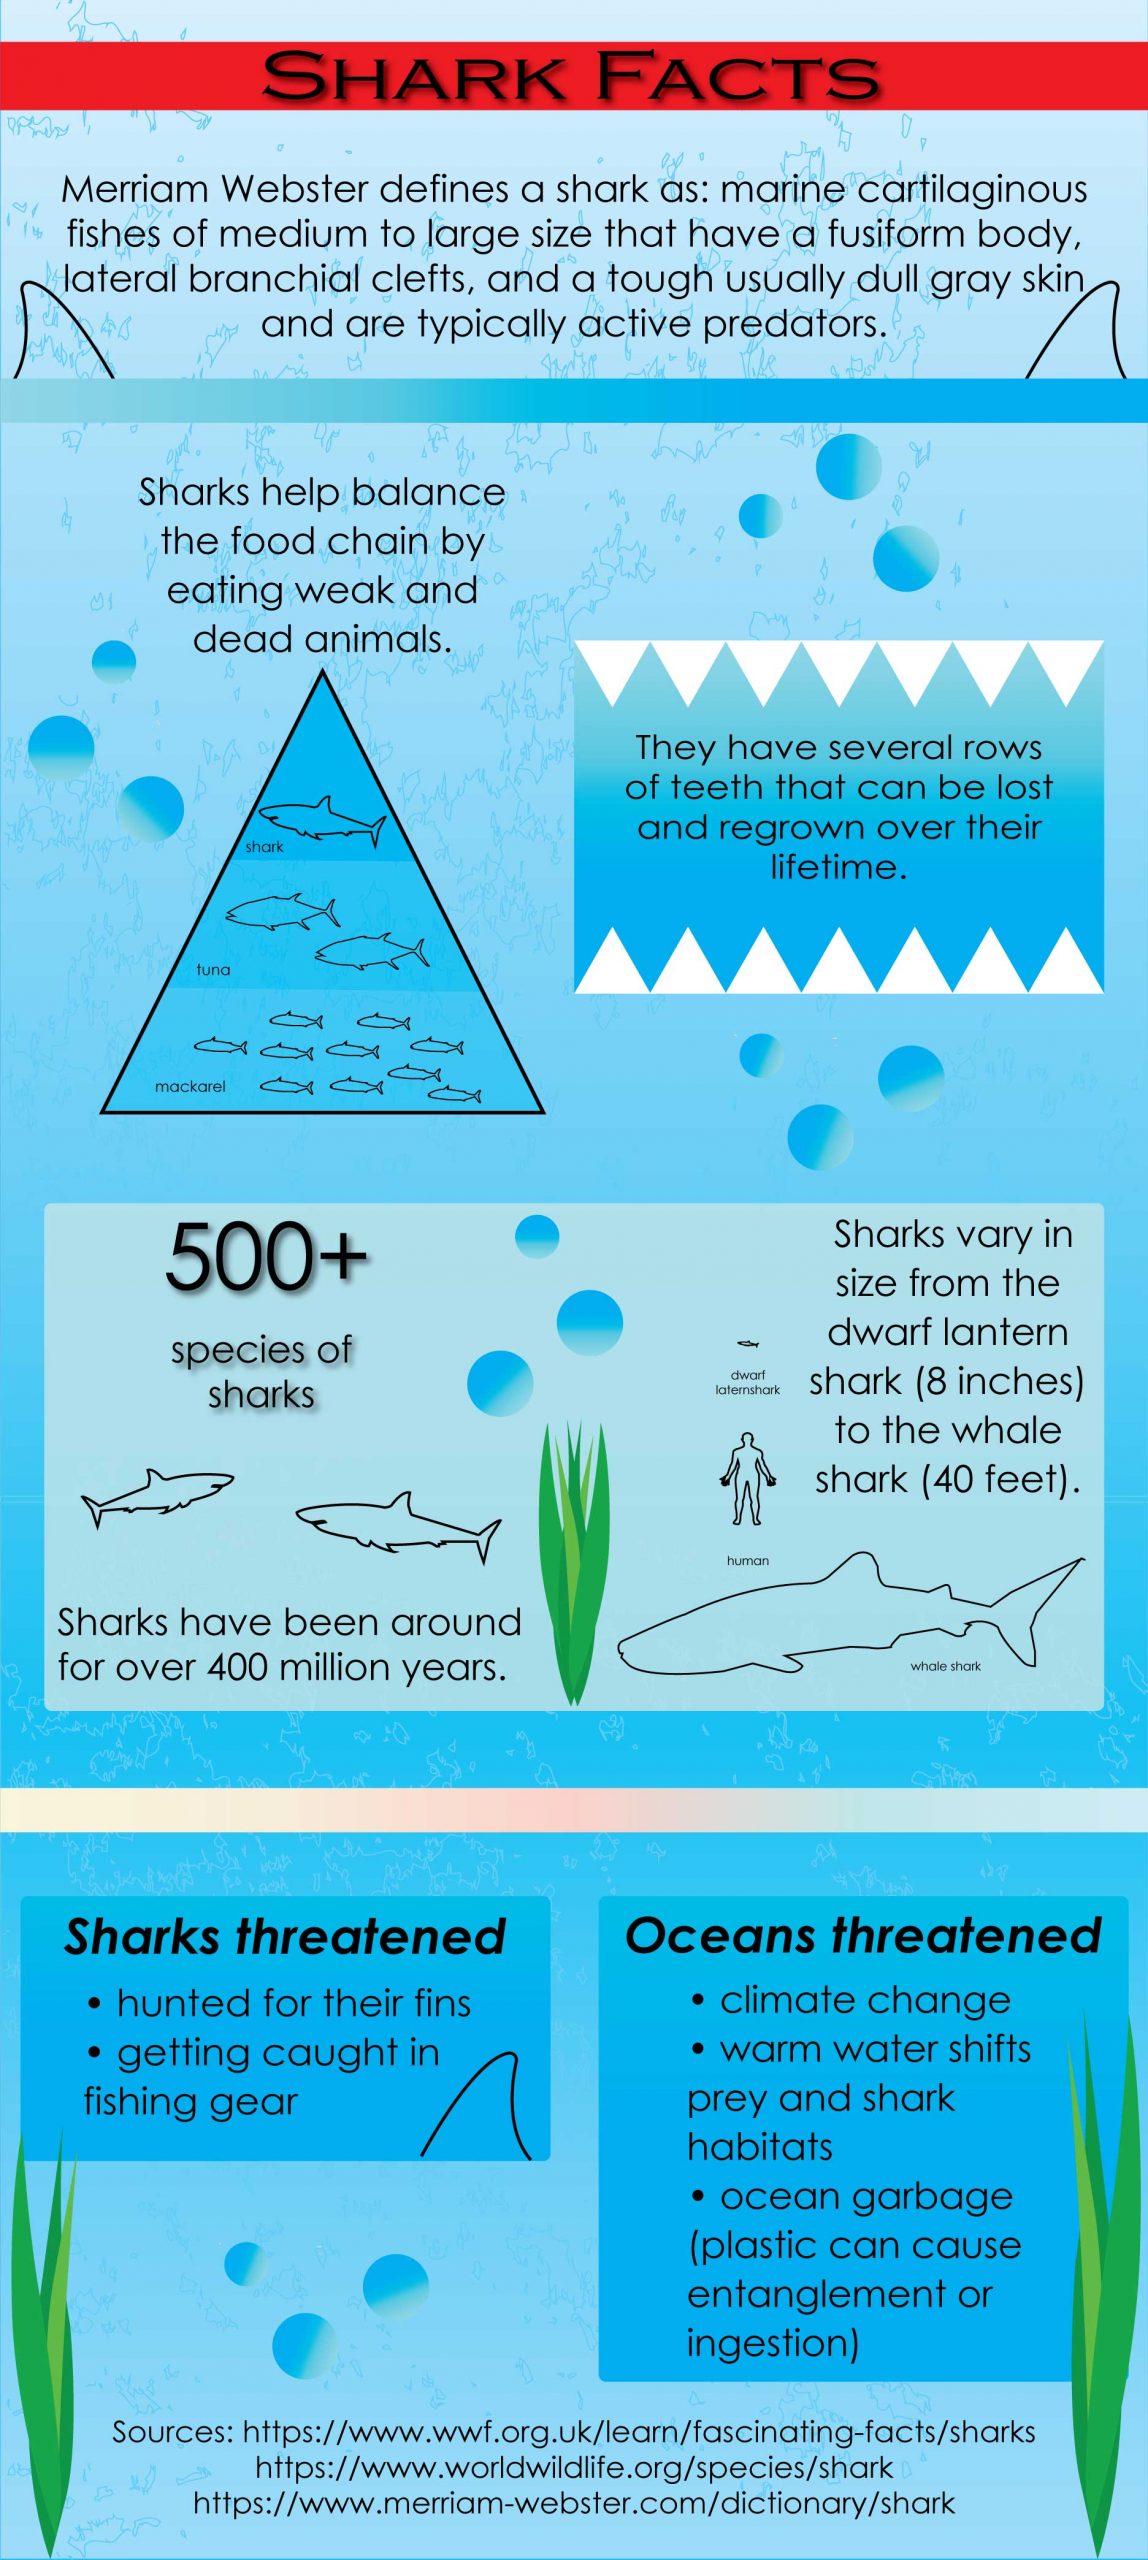 INFOGRAPHIC: At the top is a Merriam-Webster definition of a shark. Two shark fins graphics flank the sides of the text. Below the text are five different facts related to sharks. The last section is about sharks and oceans being threatened by hunting and climate change. Infographic by The Signal reporter Teagan Findler.